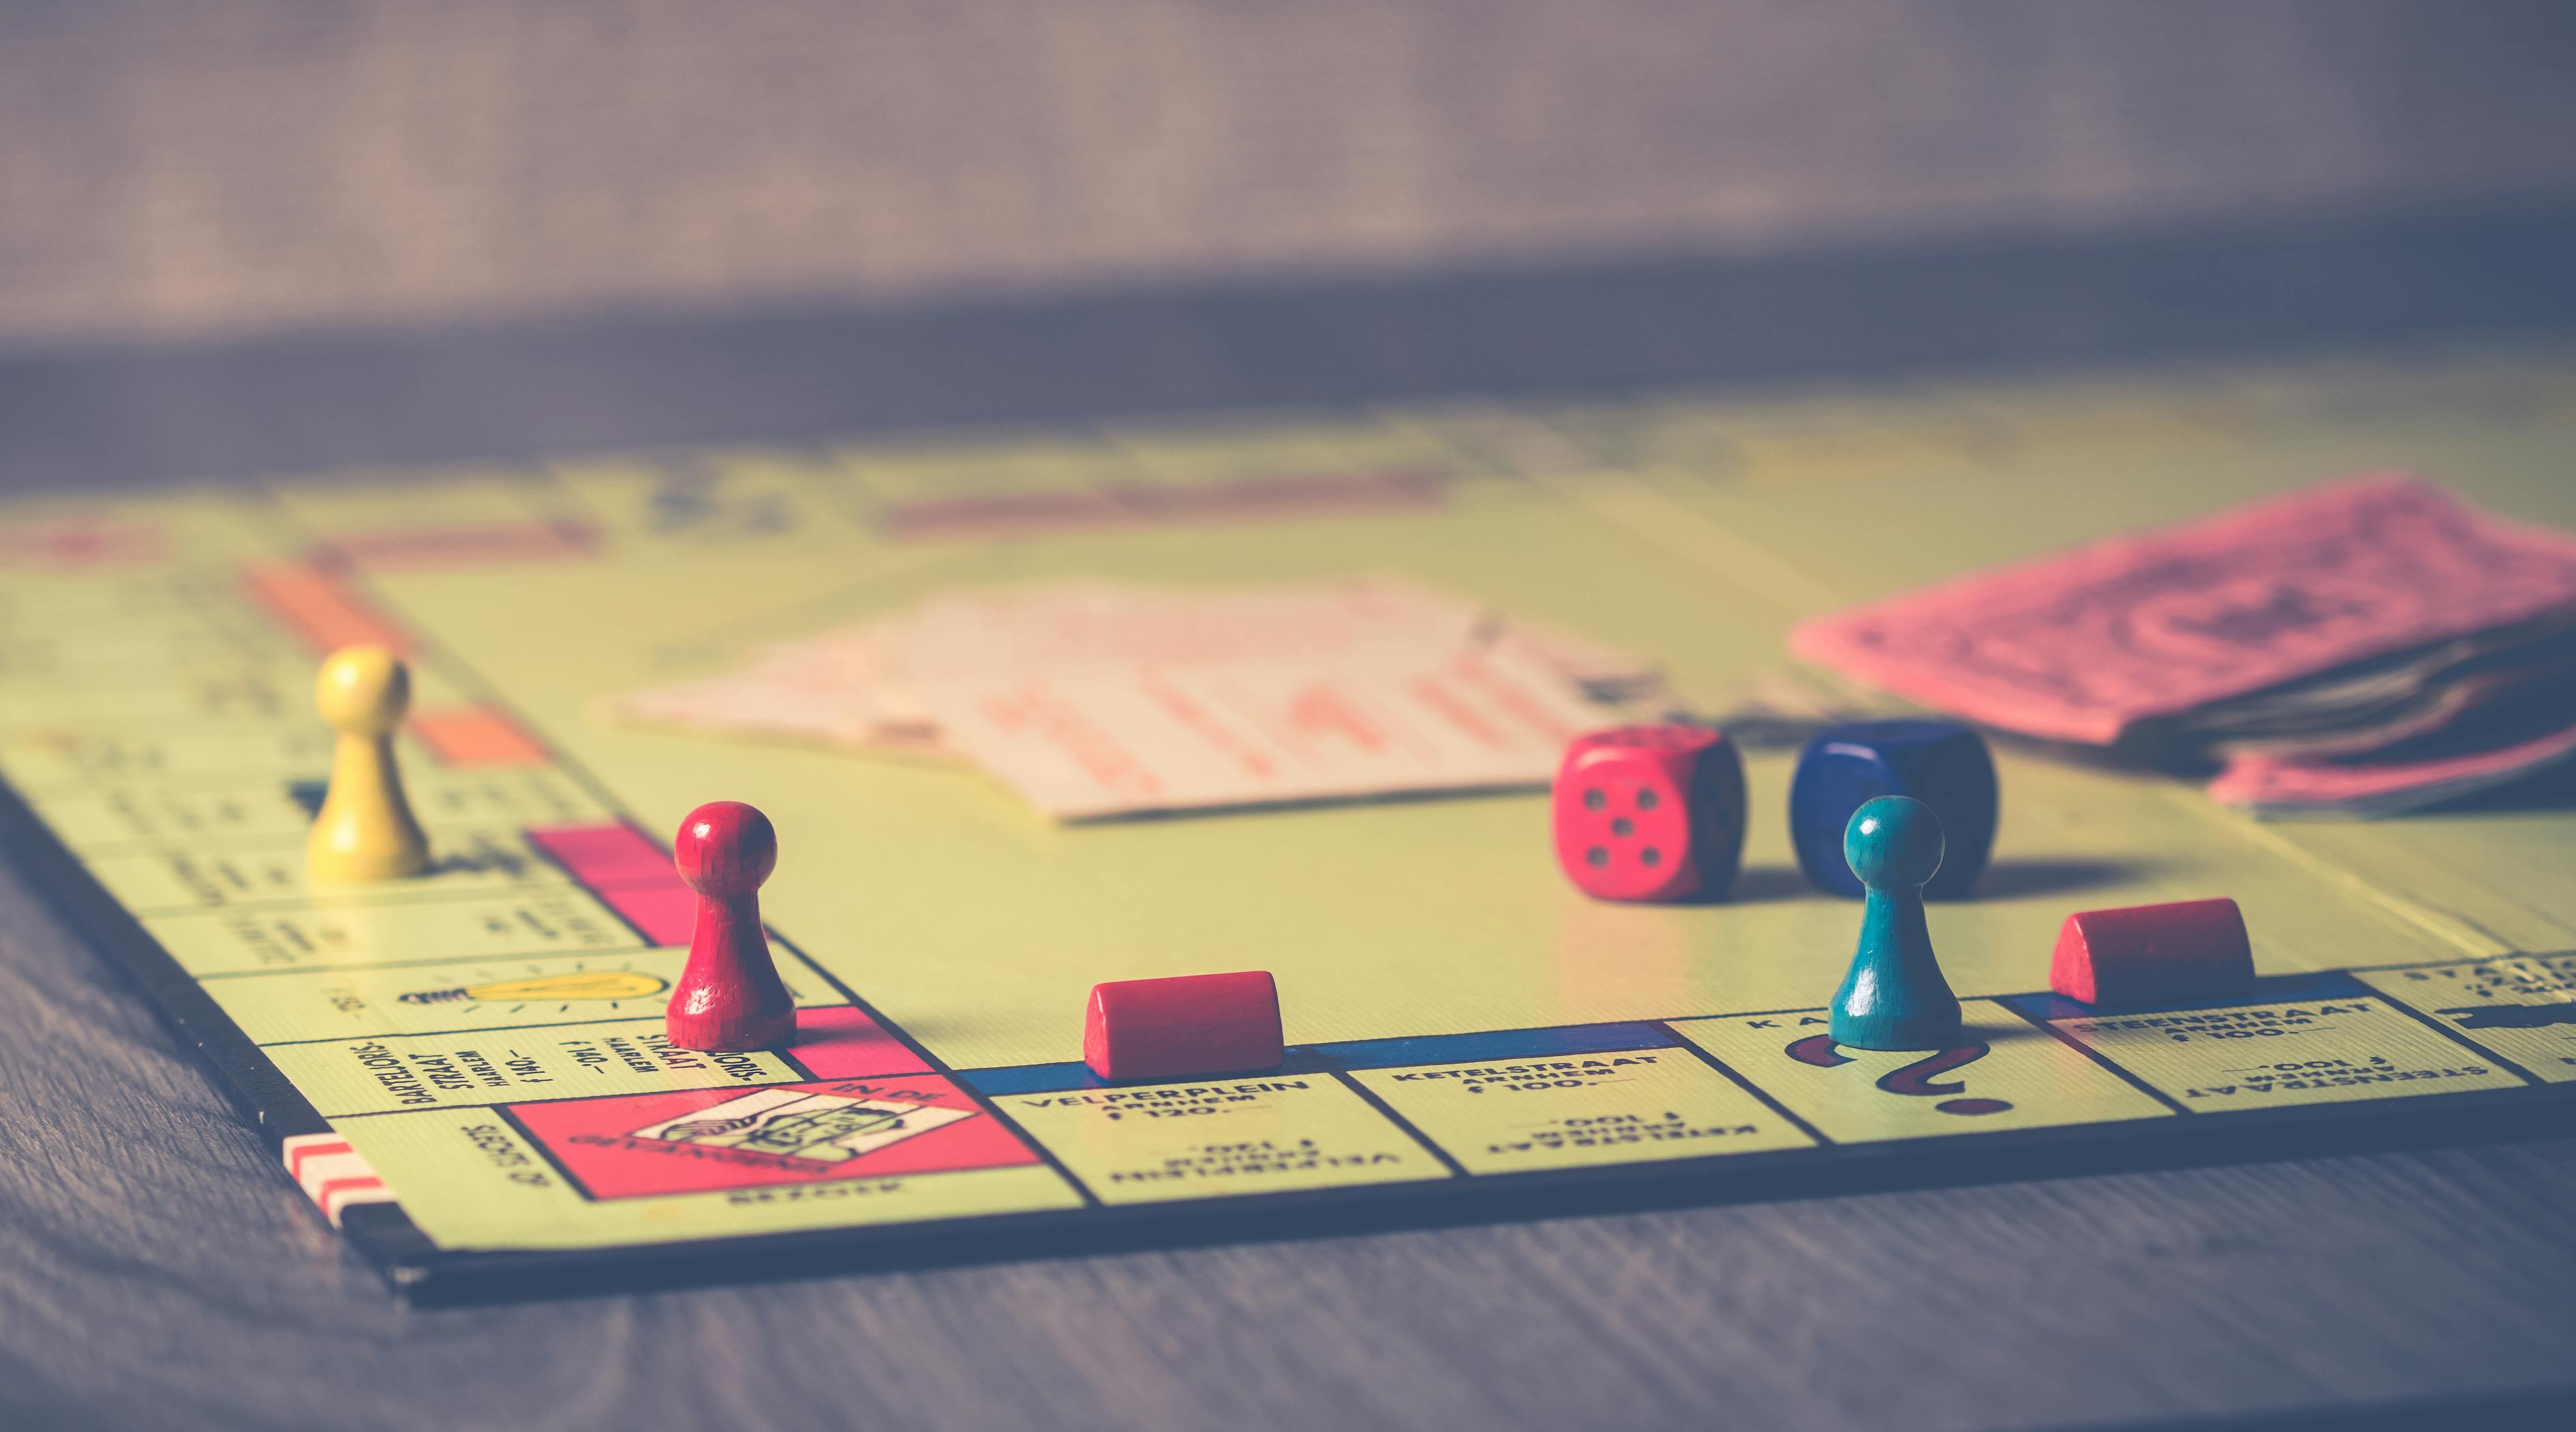 monopoly-board-game-on-brown-wooden-tabletop-free-stock-photo